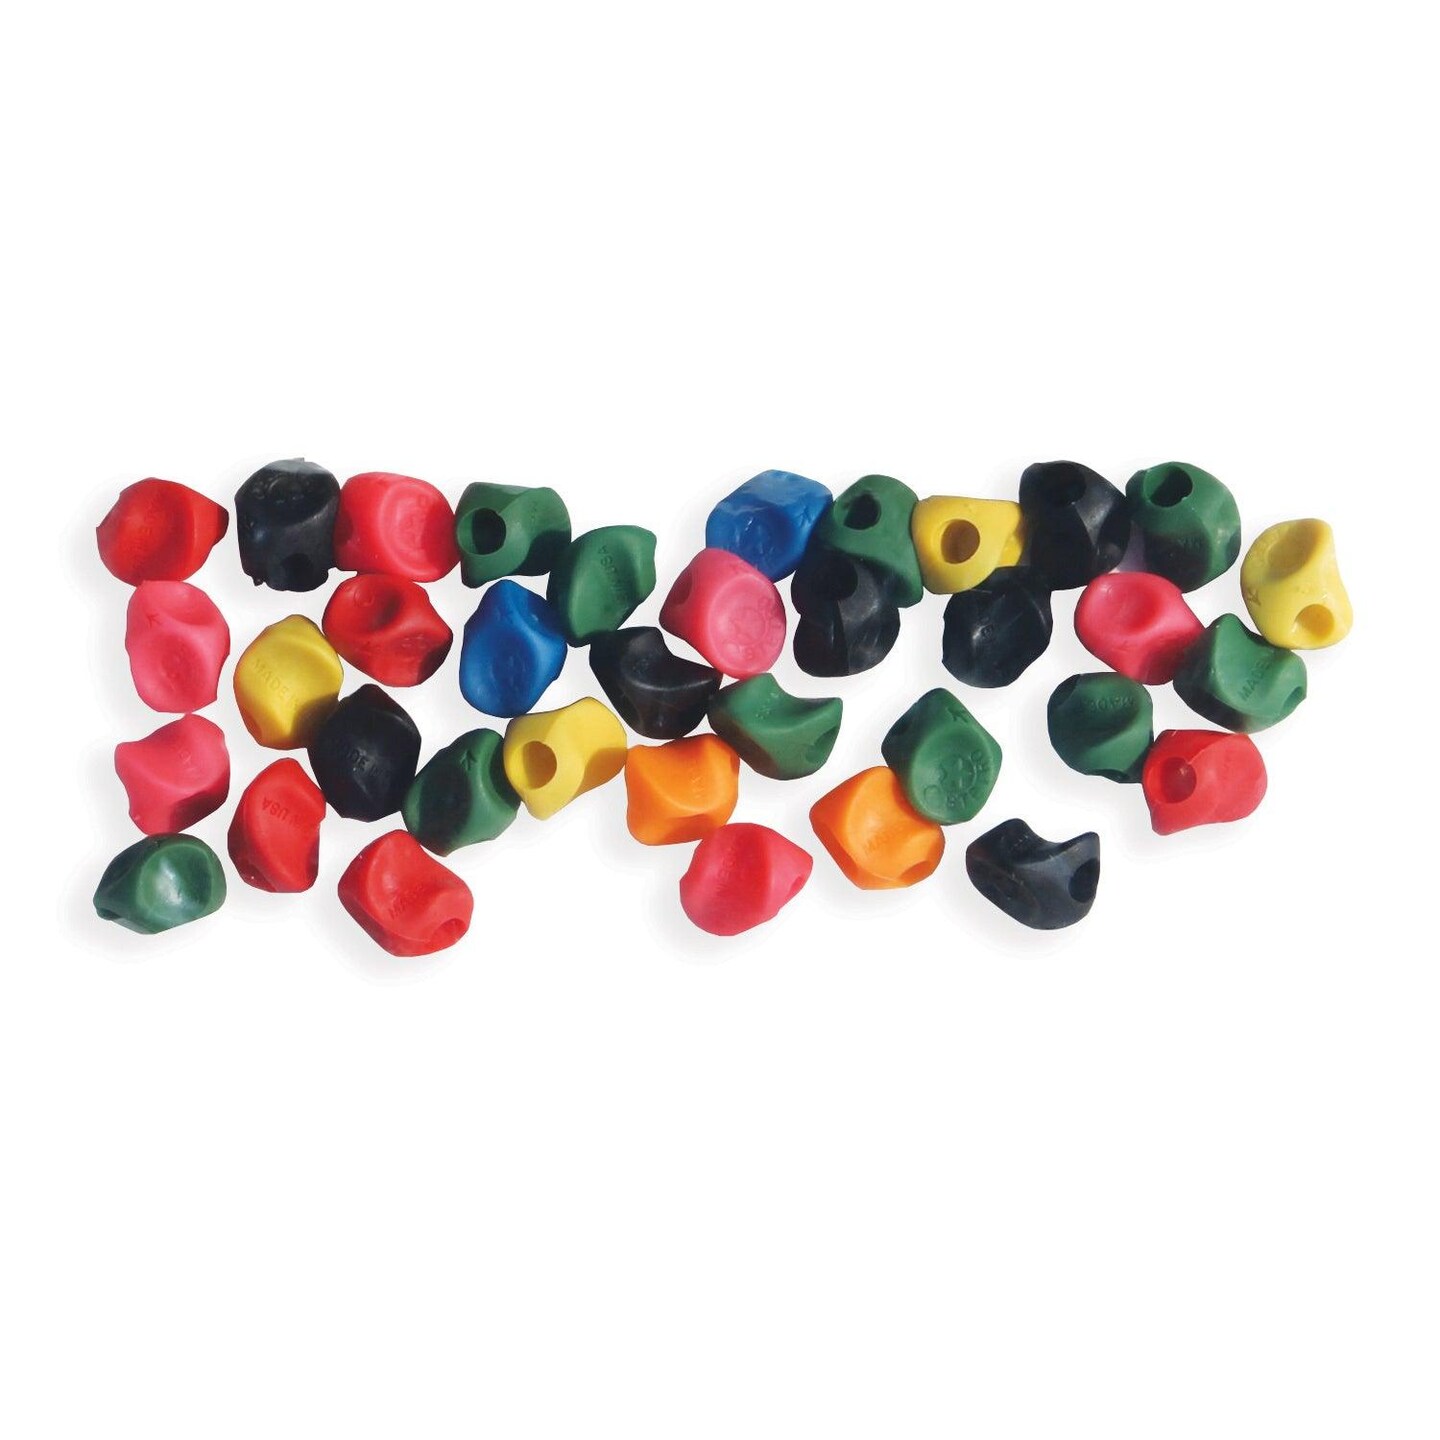 Stetro&#xAE; Pencil Grips, Pack of 144